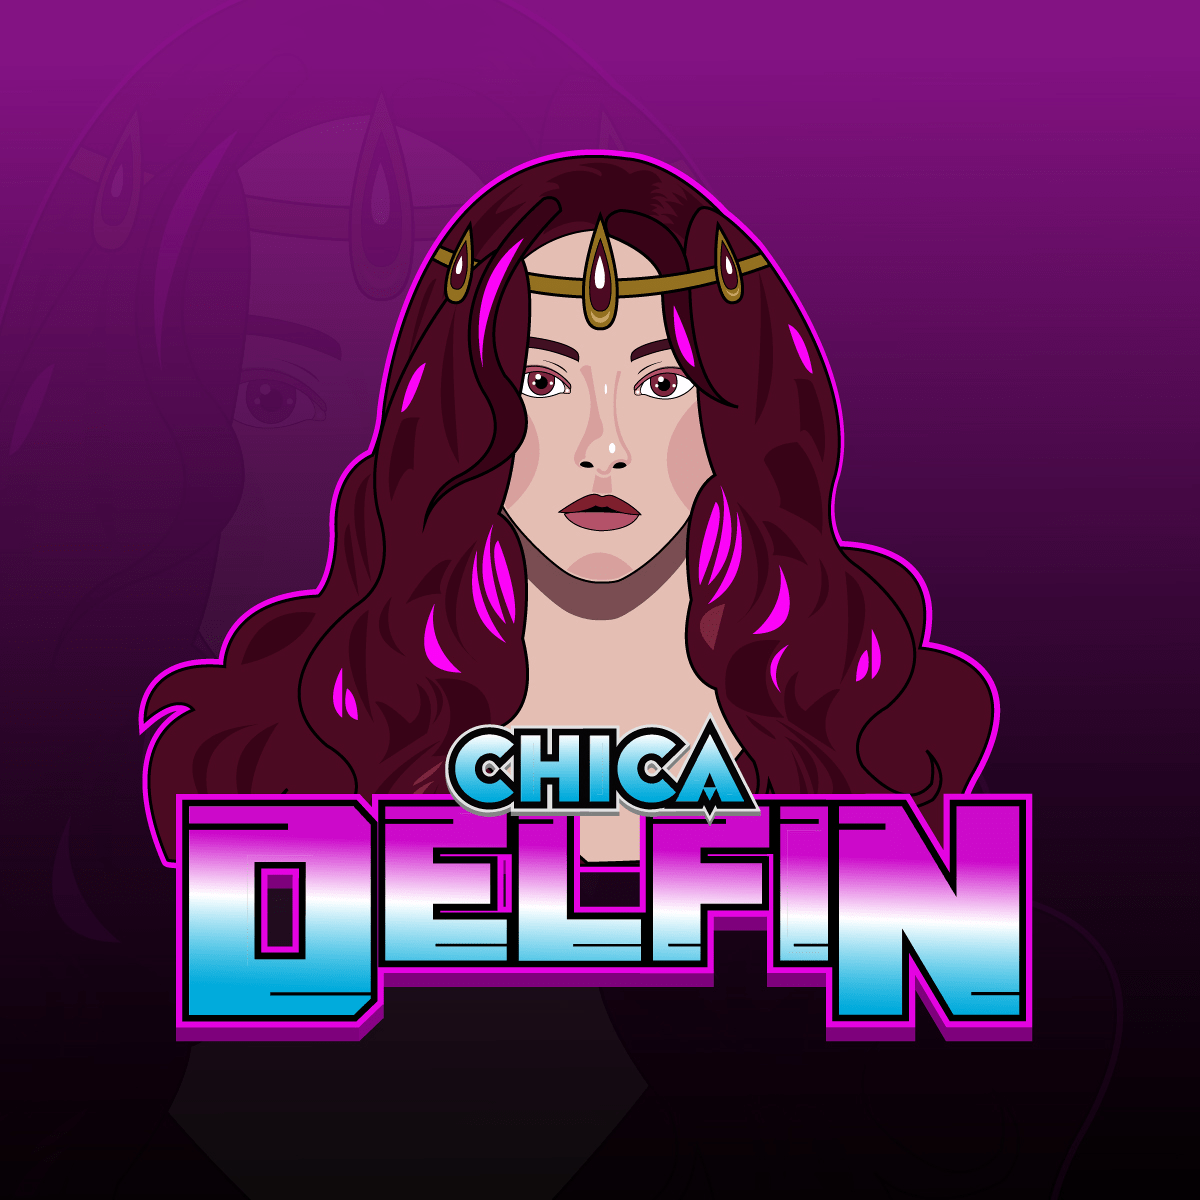 Perfil Twitch Projects  Photos, videos, logos, illustrations and